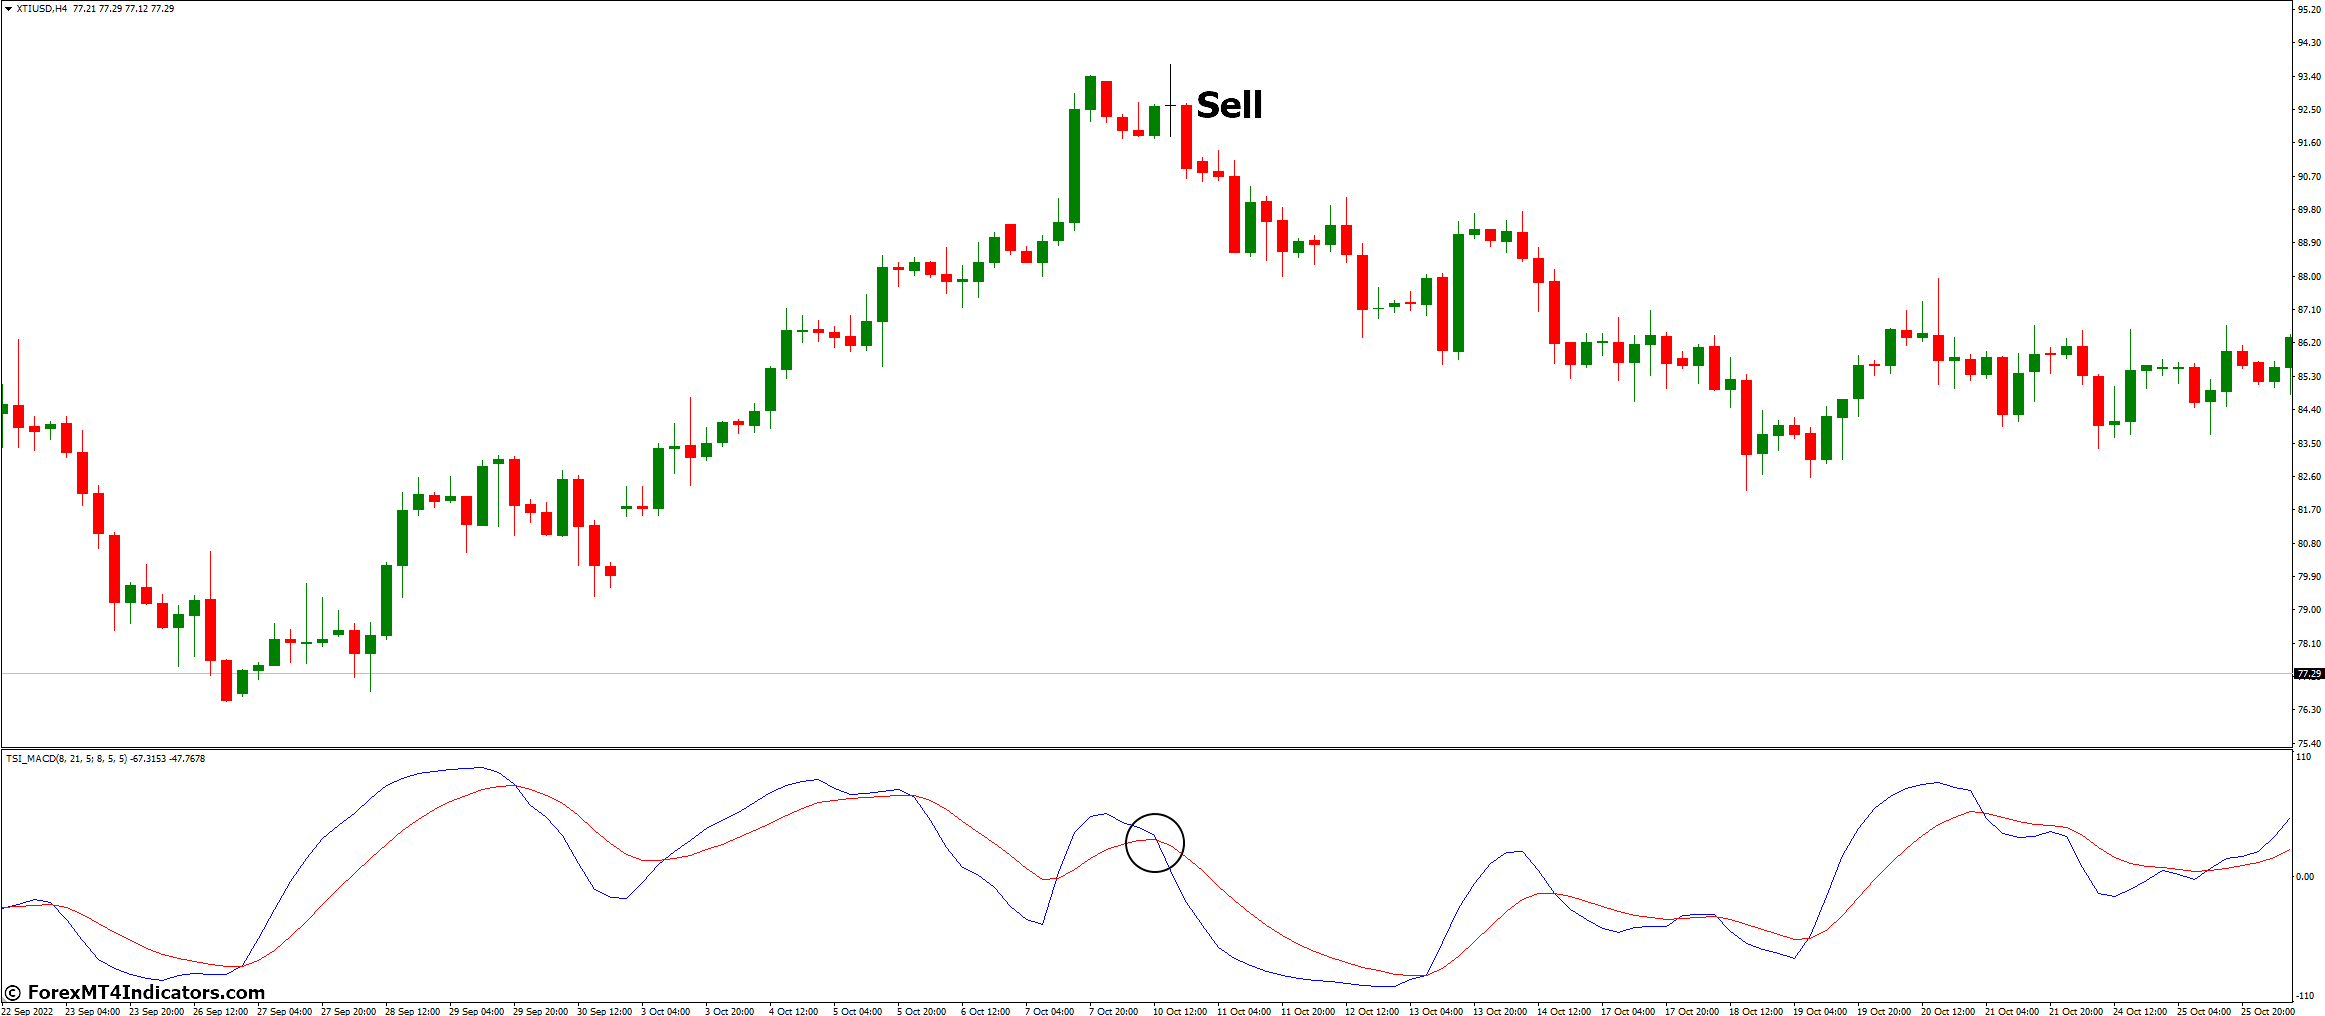 How to Trade with TSI MACD Indicator - Sell Entry